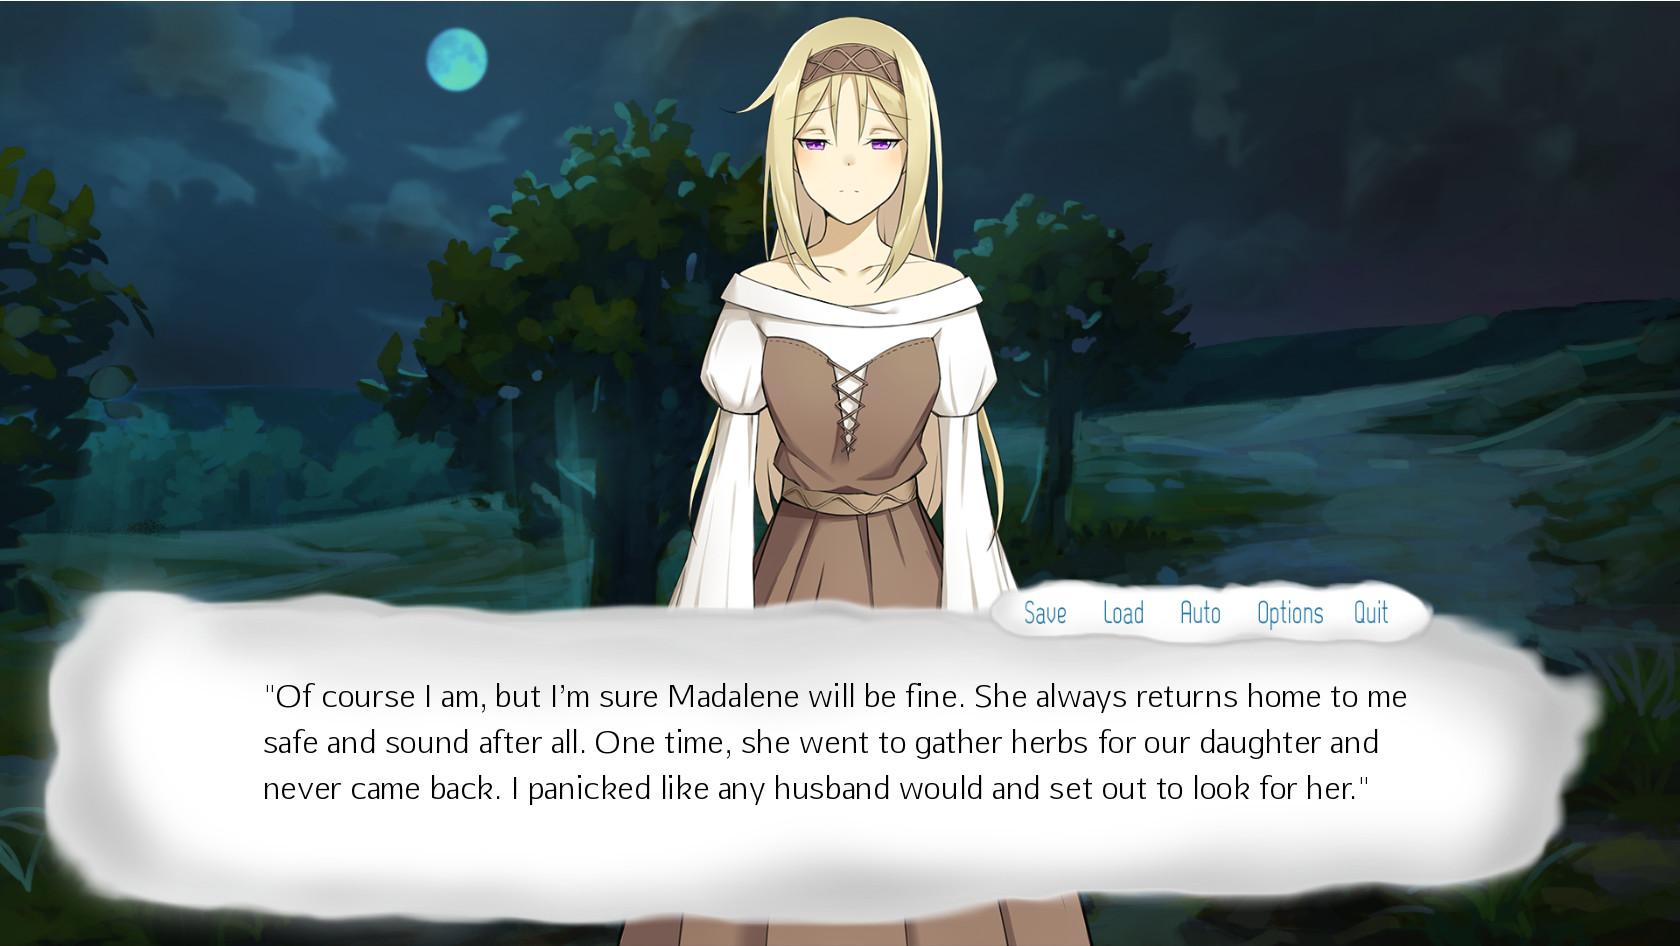 Screenshot №3 from game Forgotten, Not Lost - A Kinetic Novel